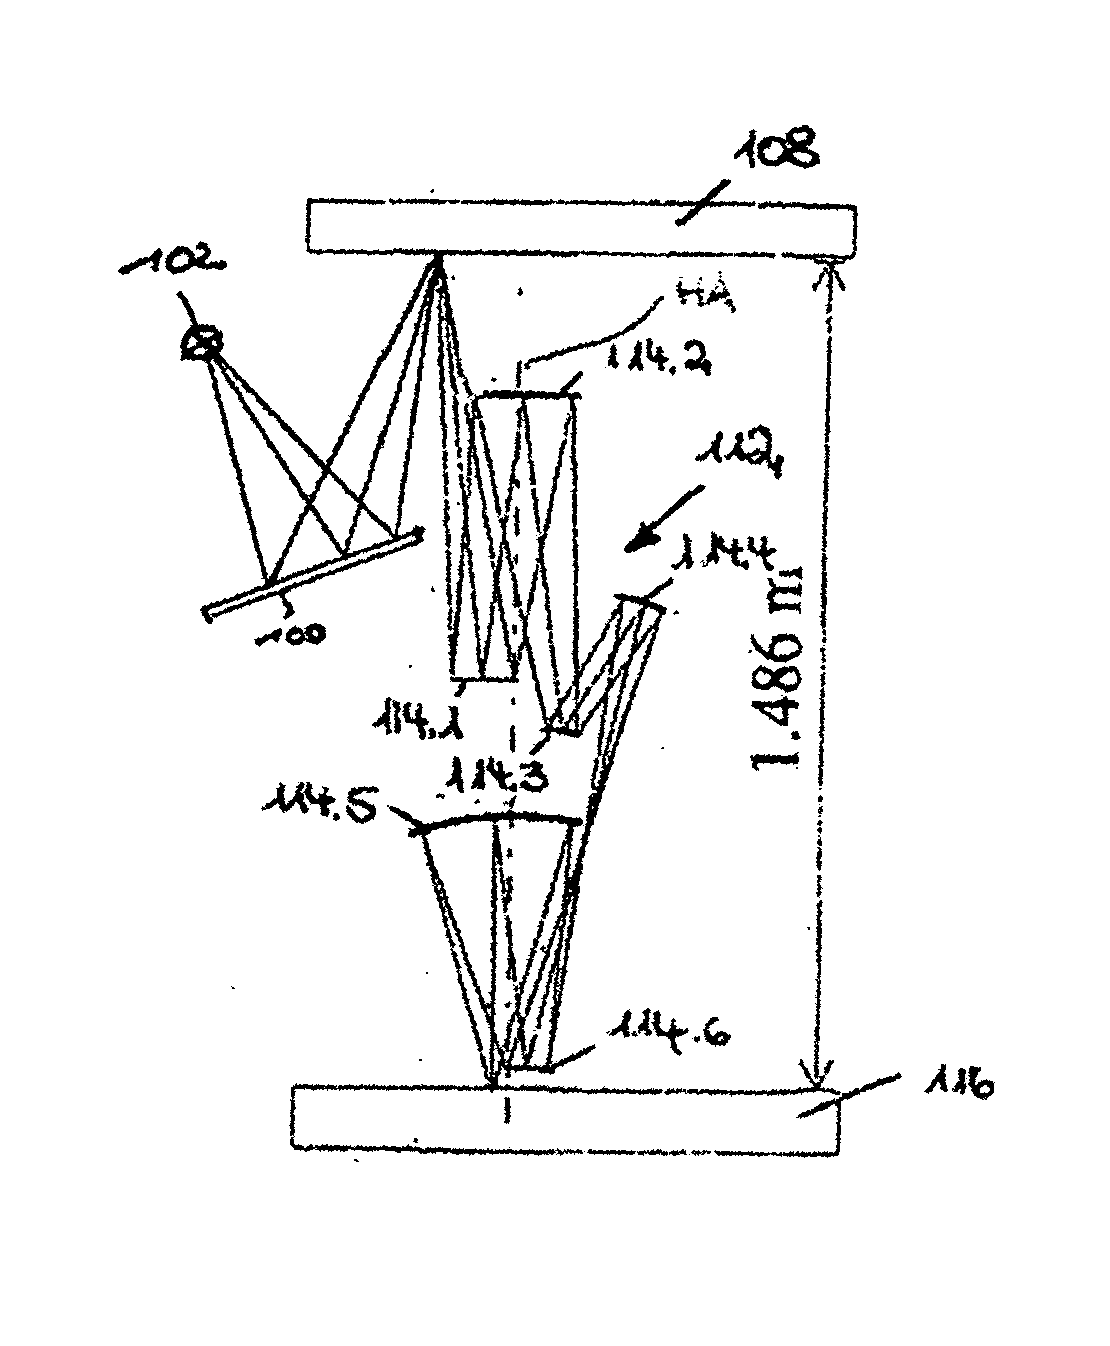 Optical element for an illumination system